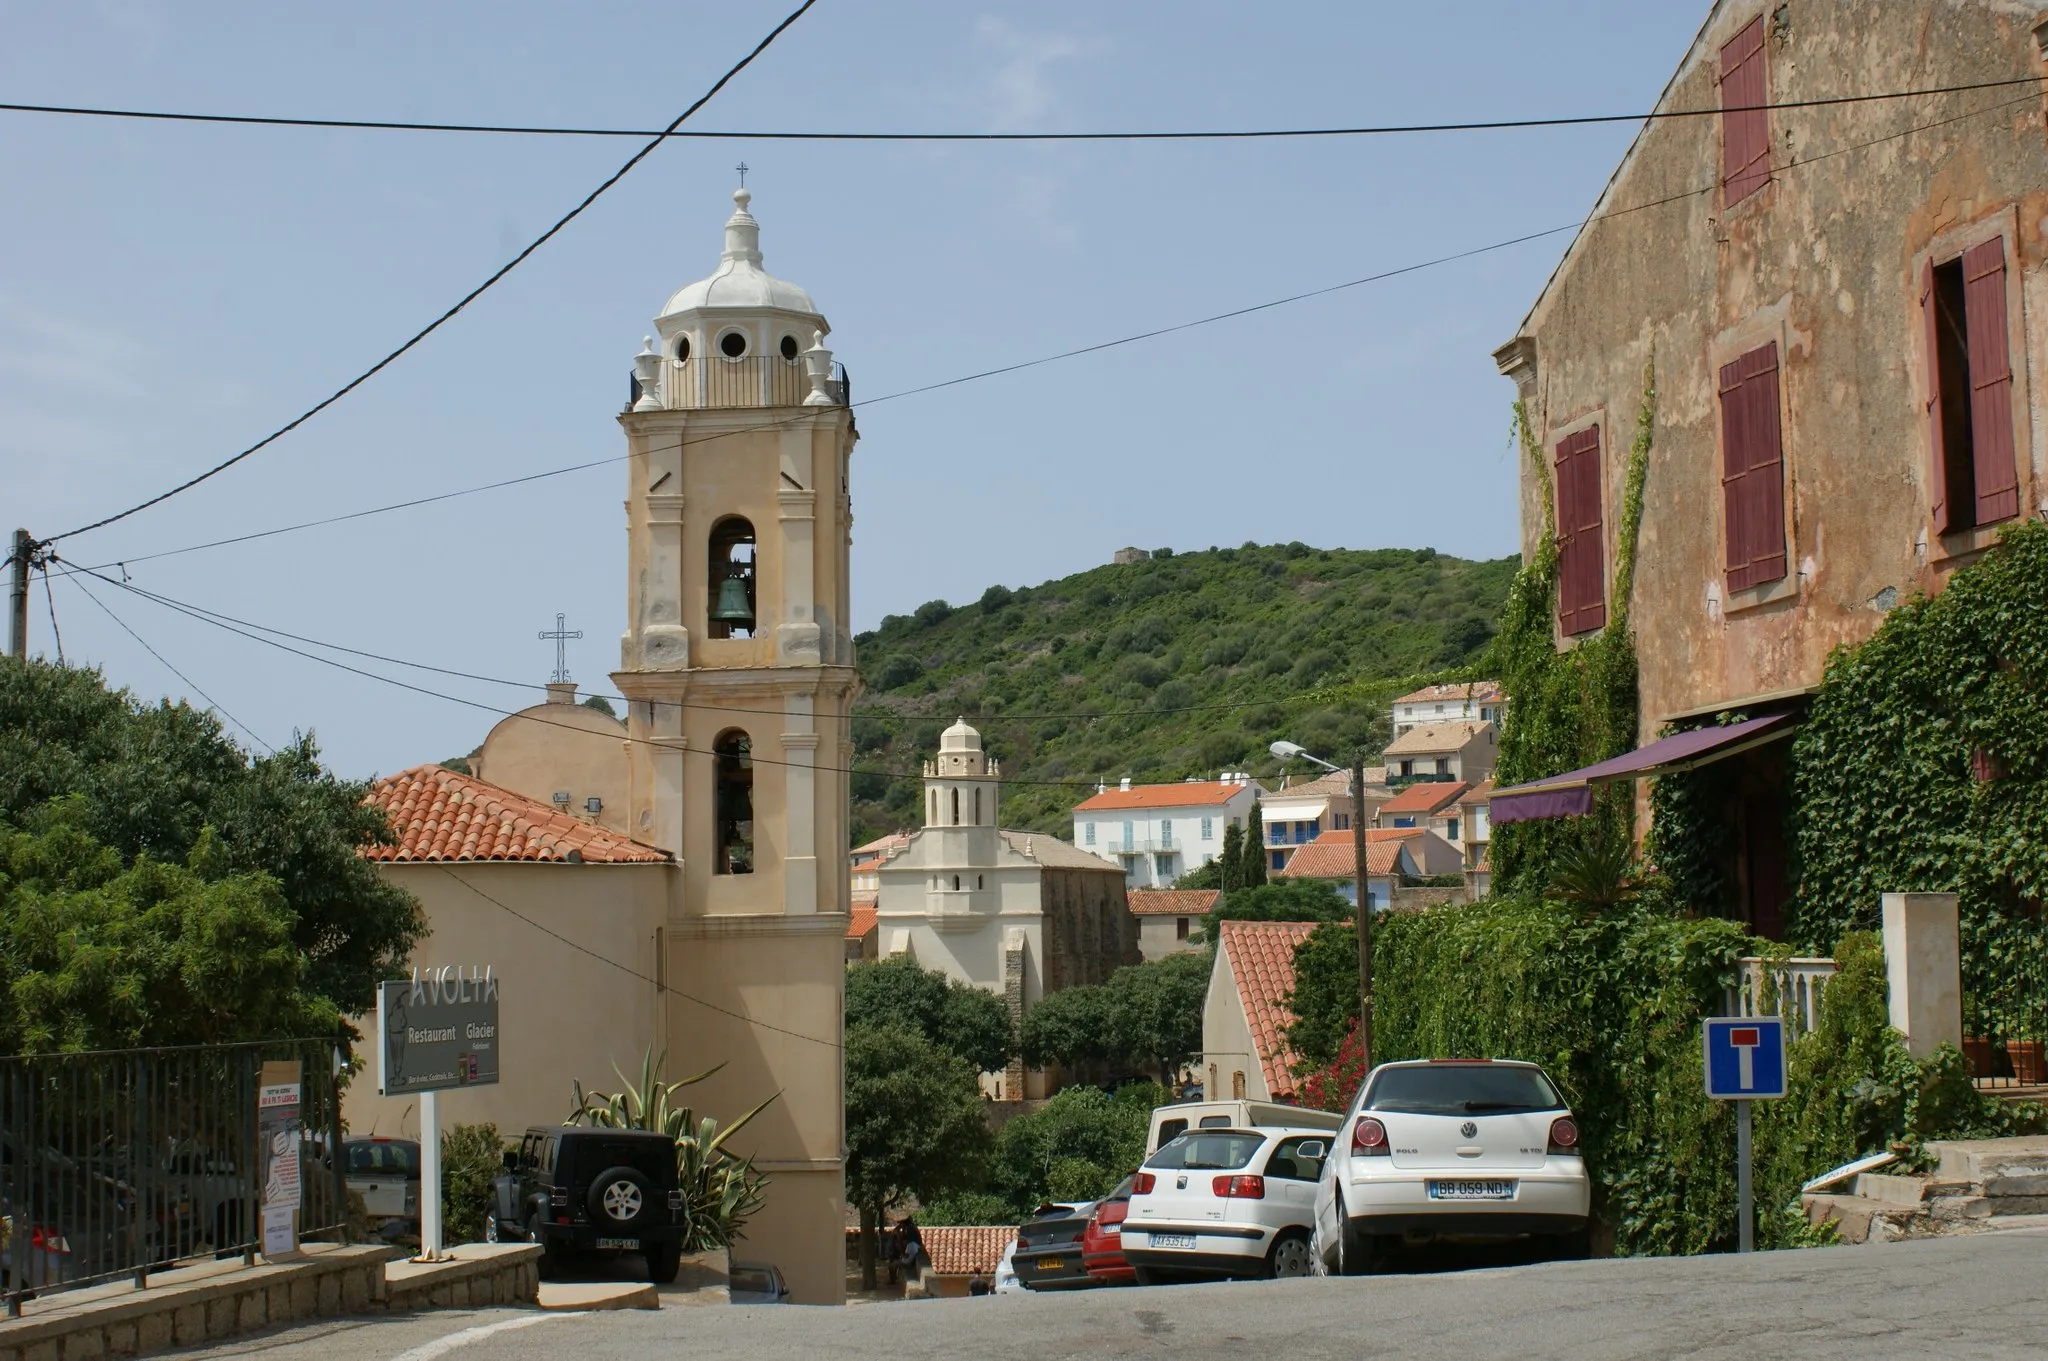 Photo showing: The Roman Catholic church (foreground) facing the Greek Orthodox church (background).